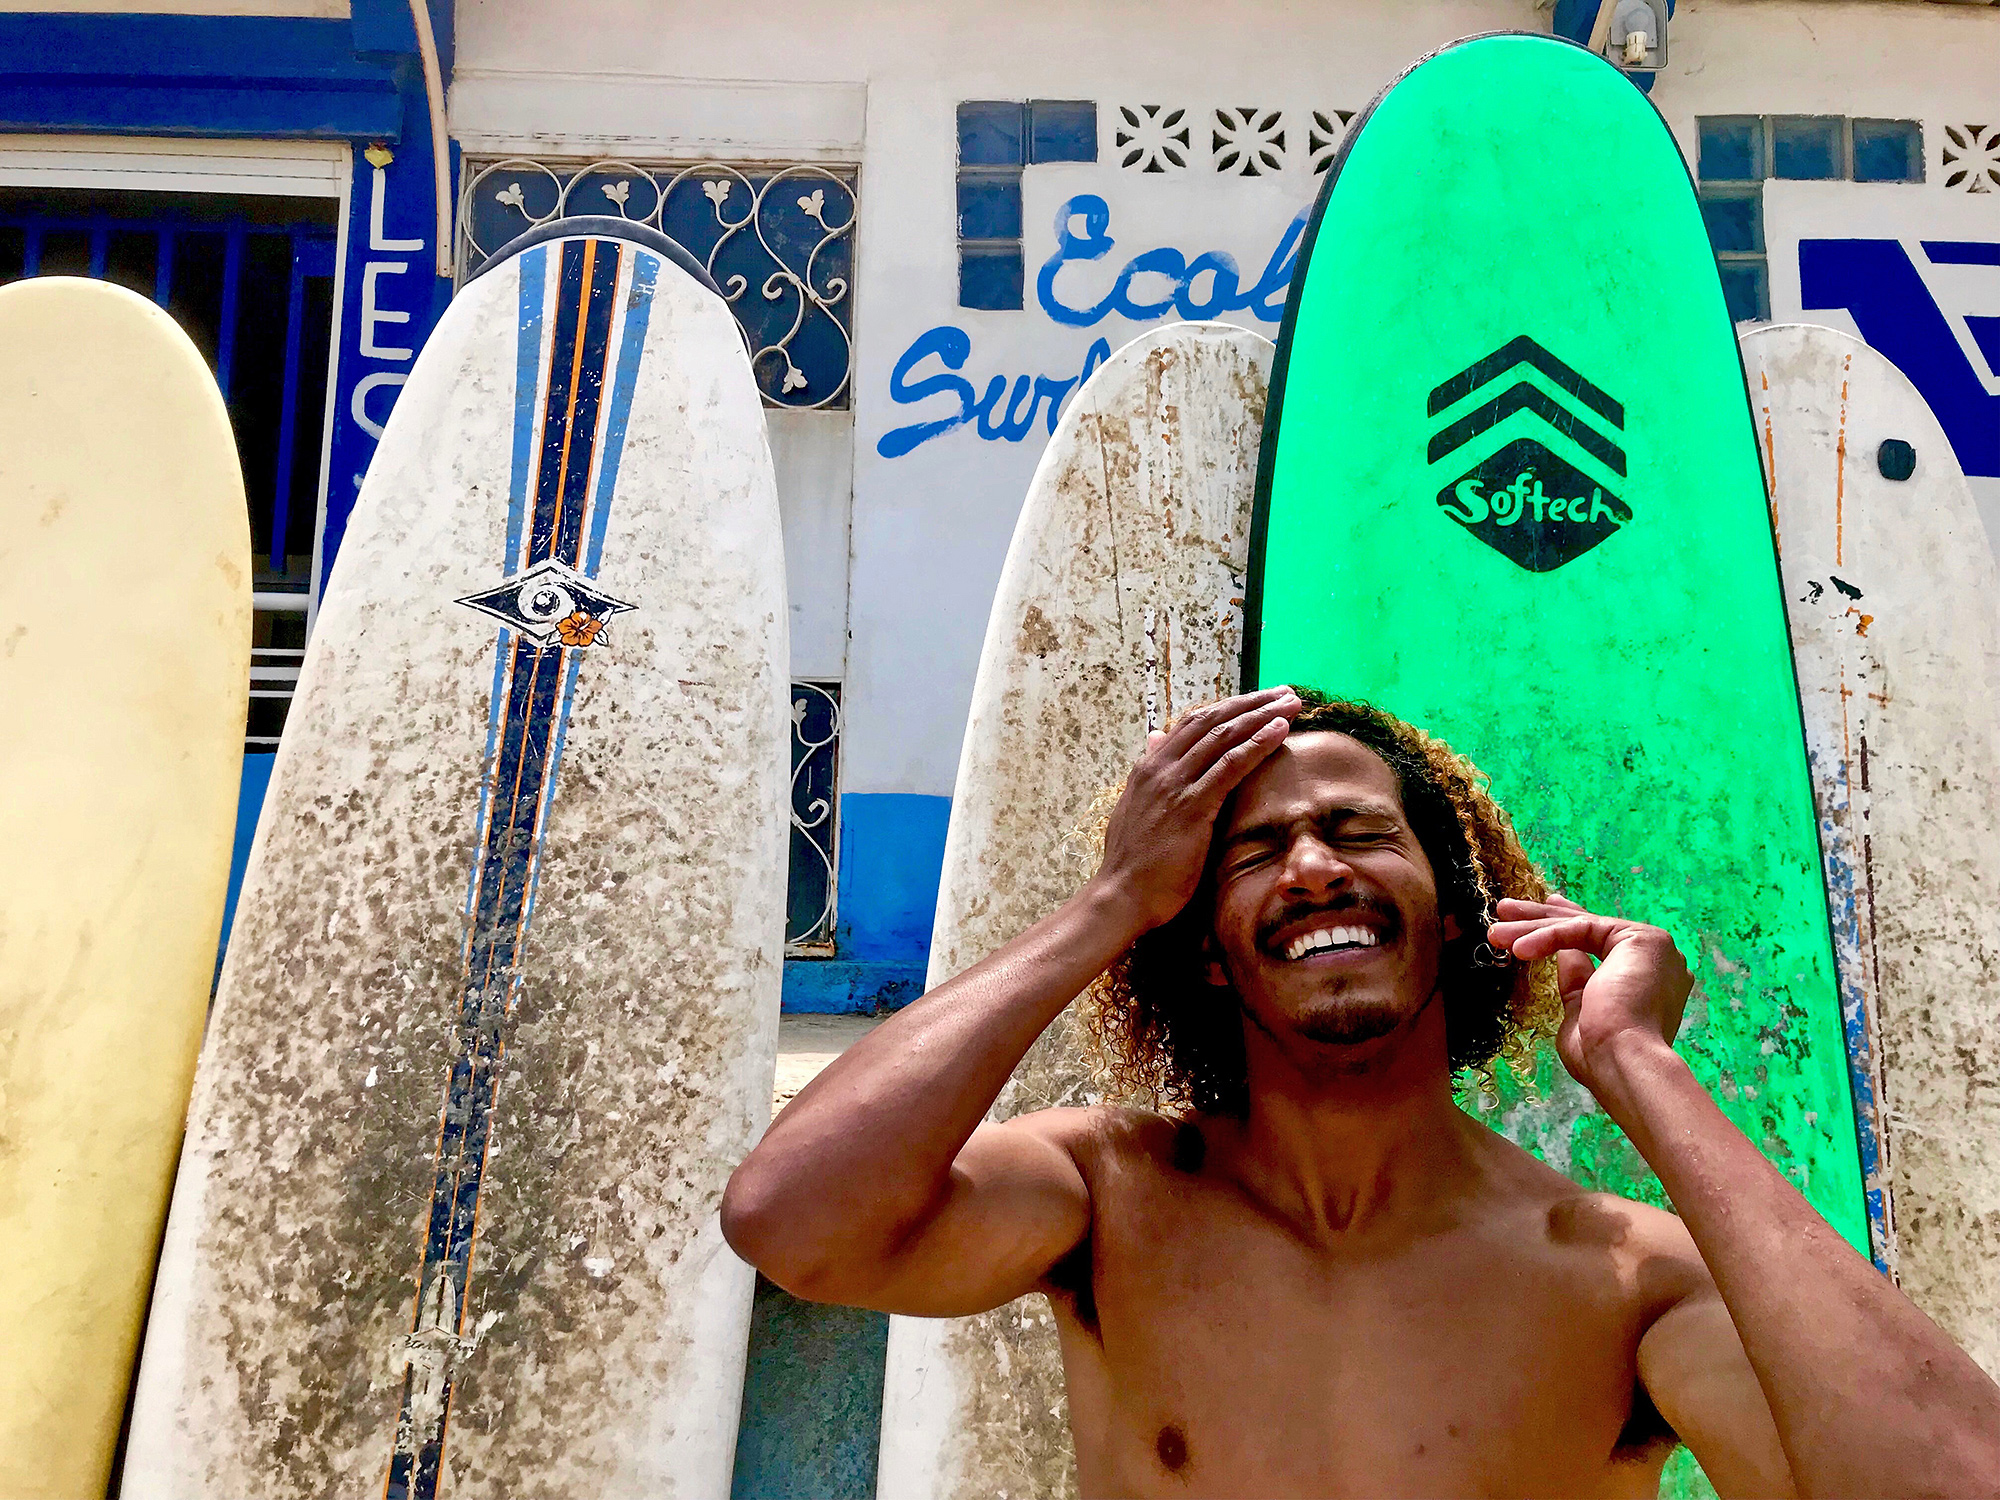 a shirtless man smiles in front of several surfboards leaning against a tiled wall